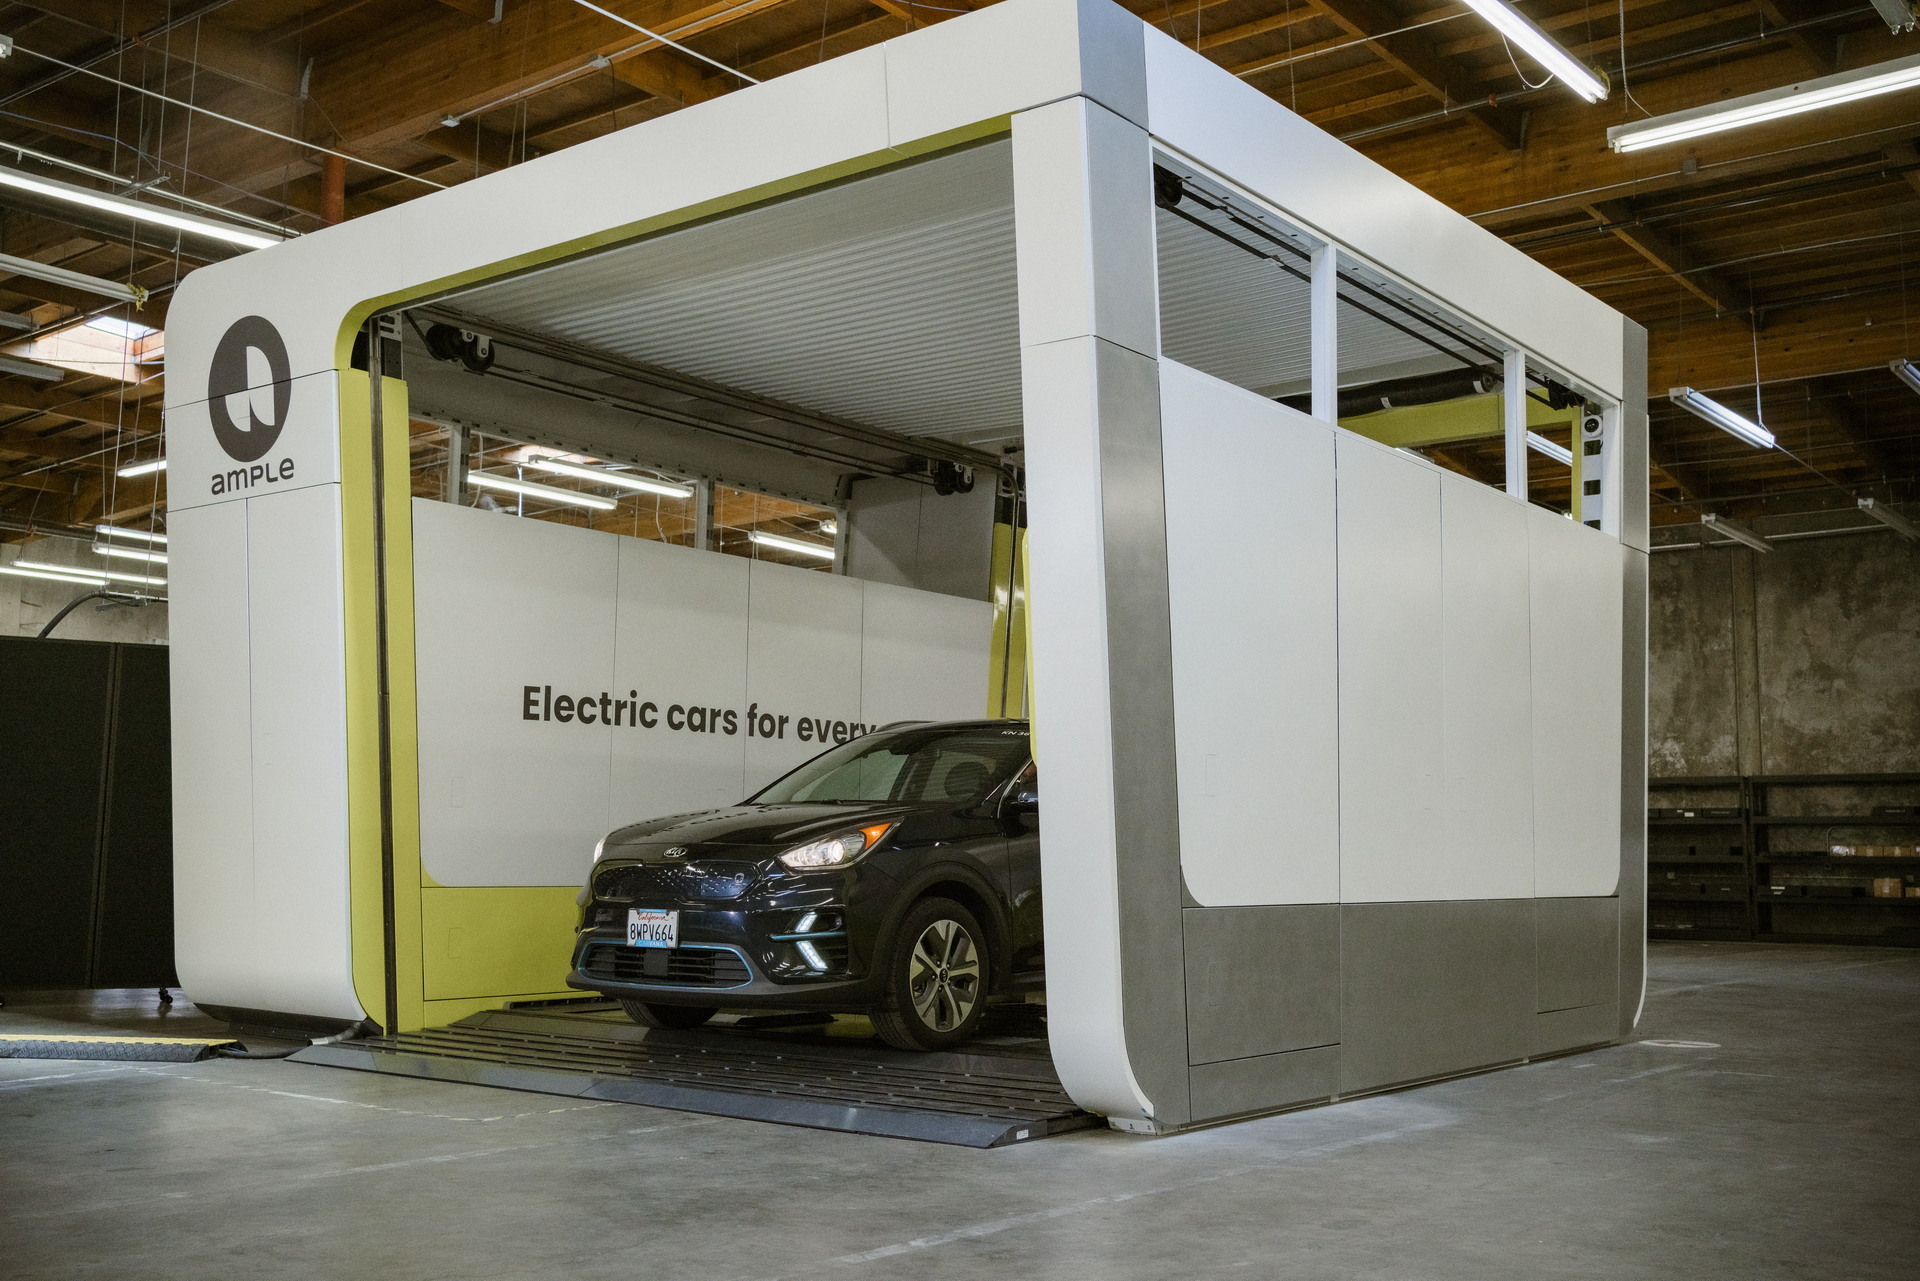 Ample Moves Closer To 5Minute EV Battery Swaps As The Future Of